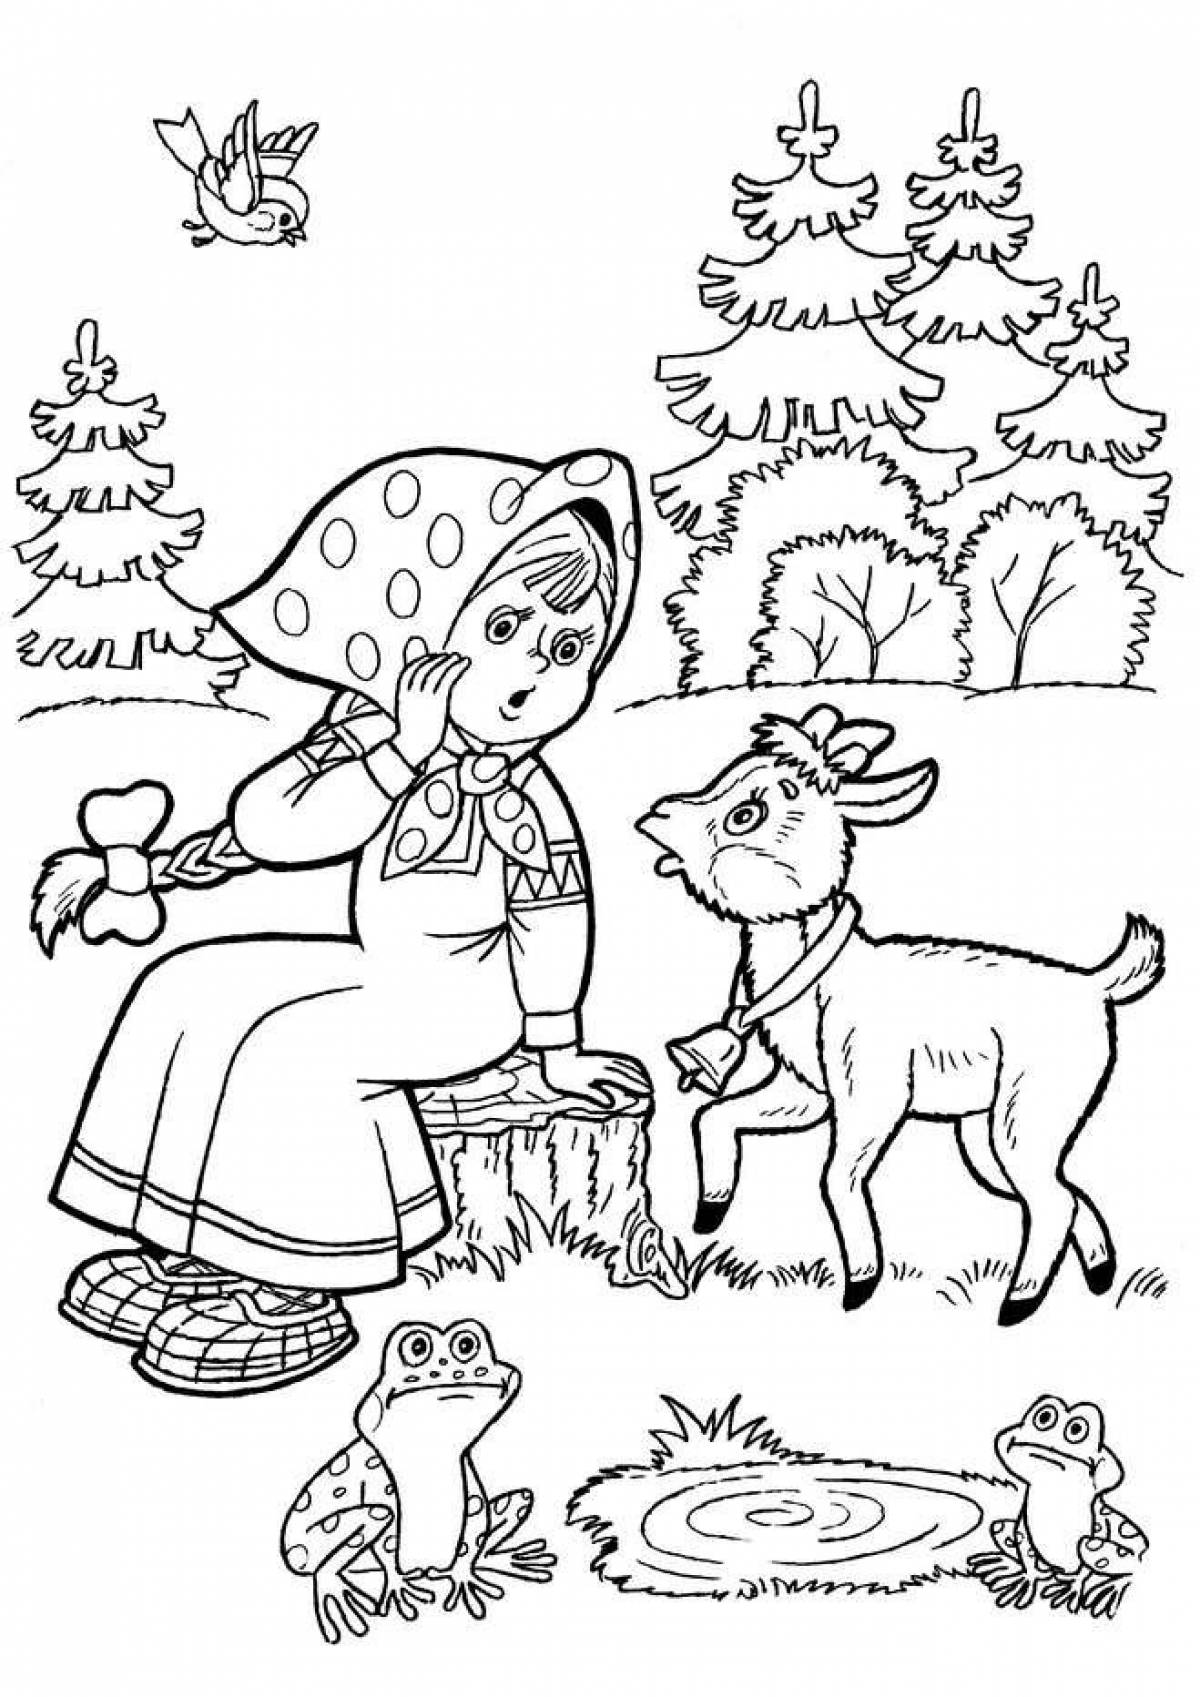 Coloring pages heroes of fairy tales